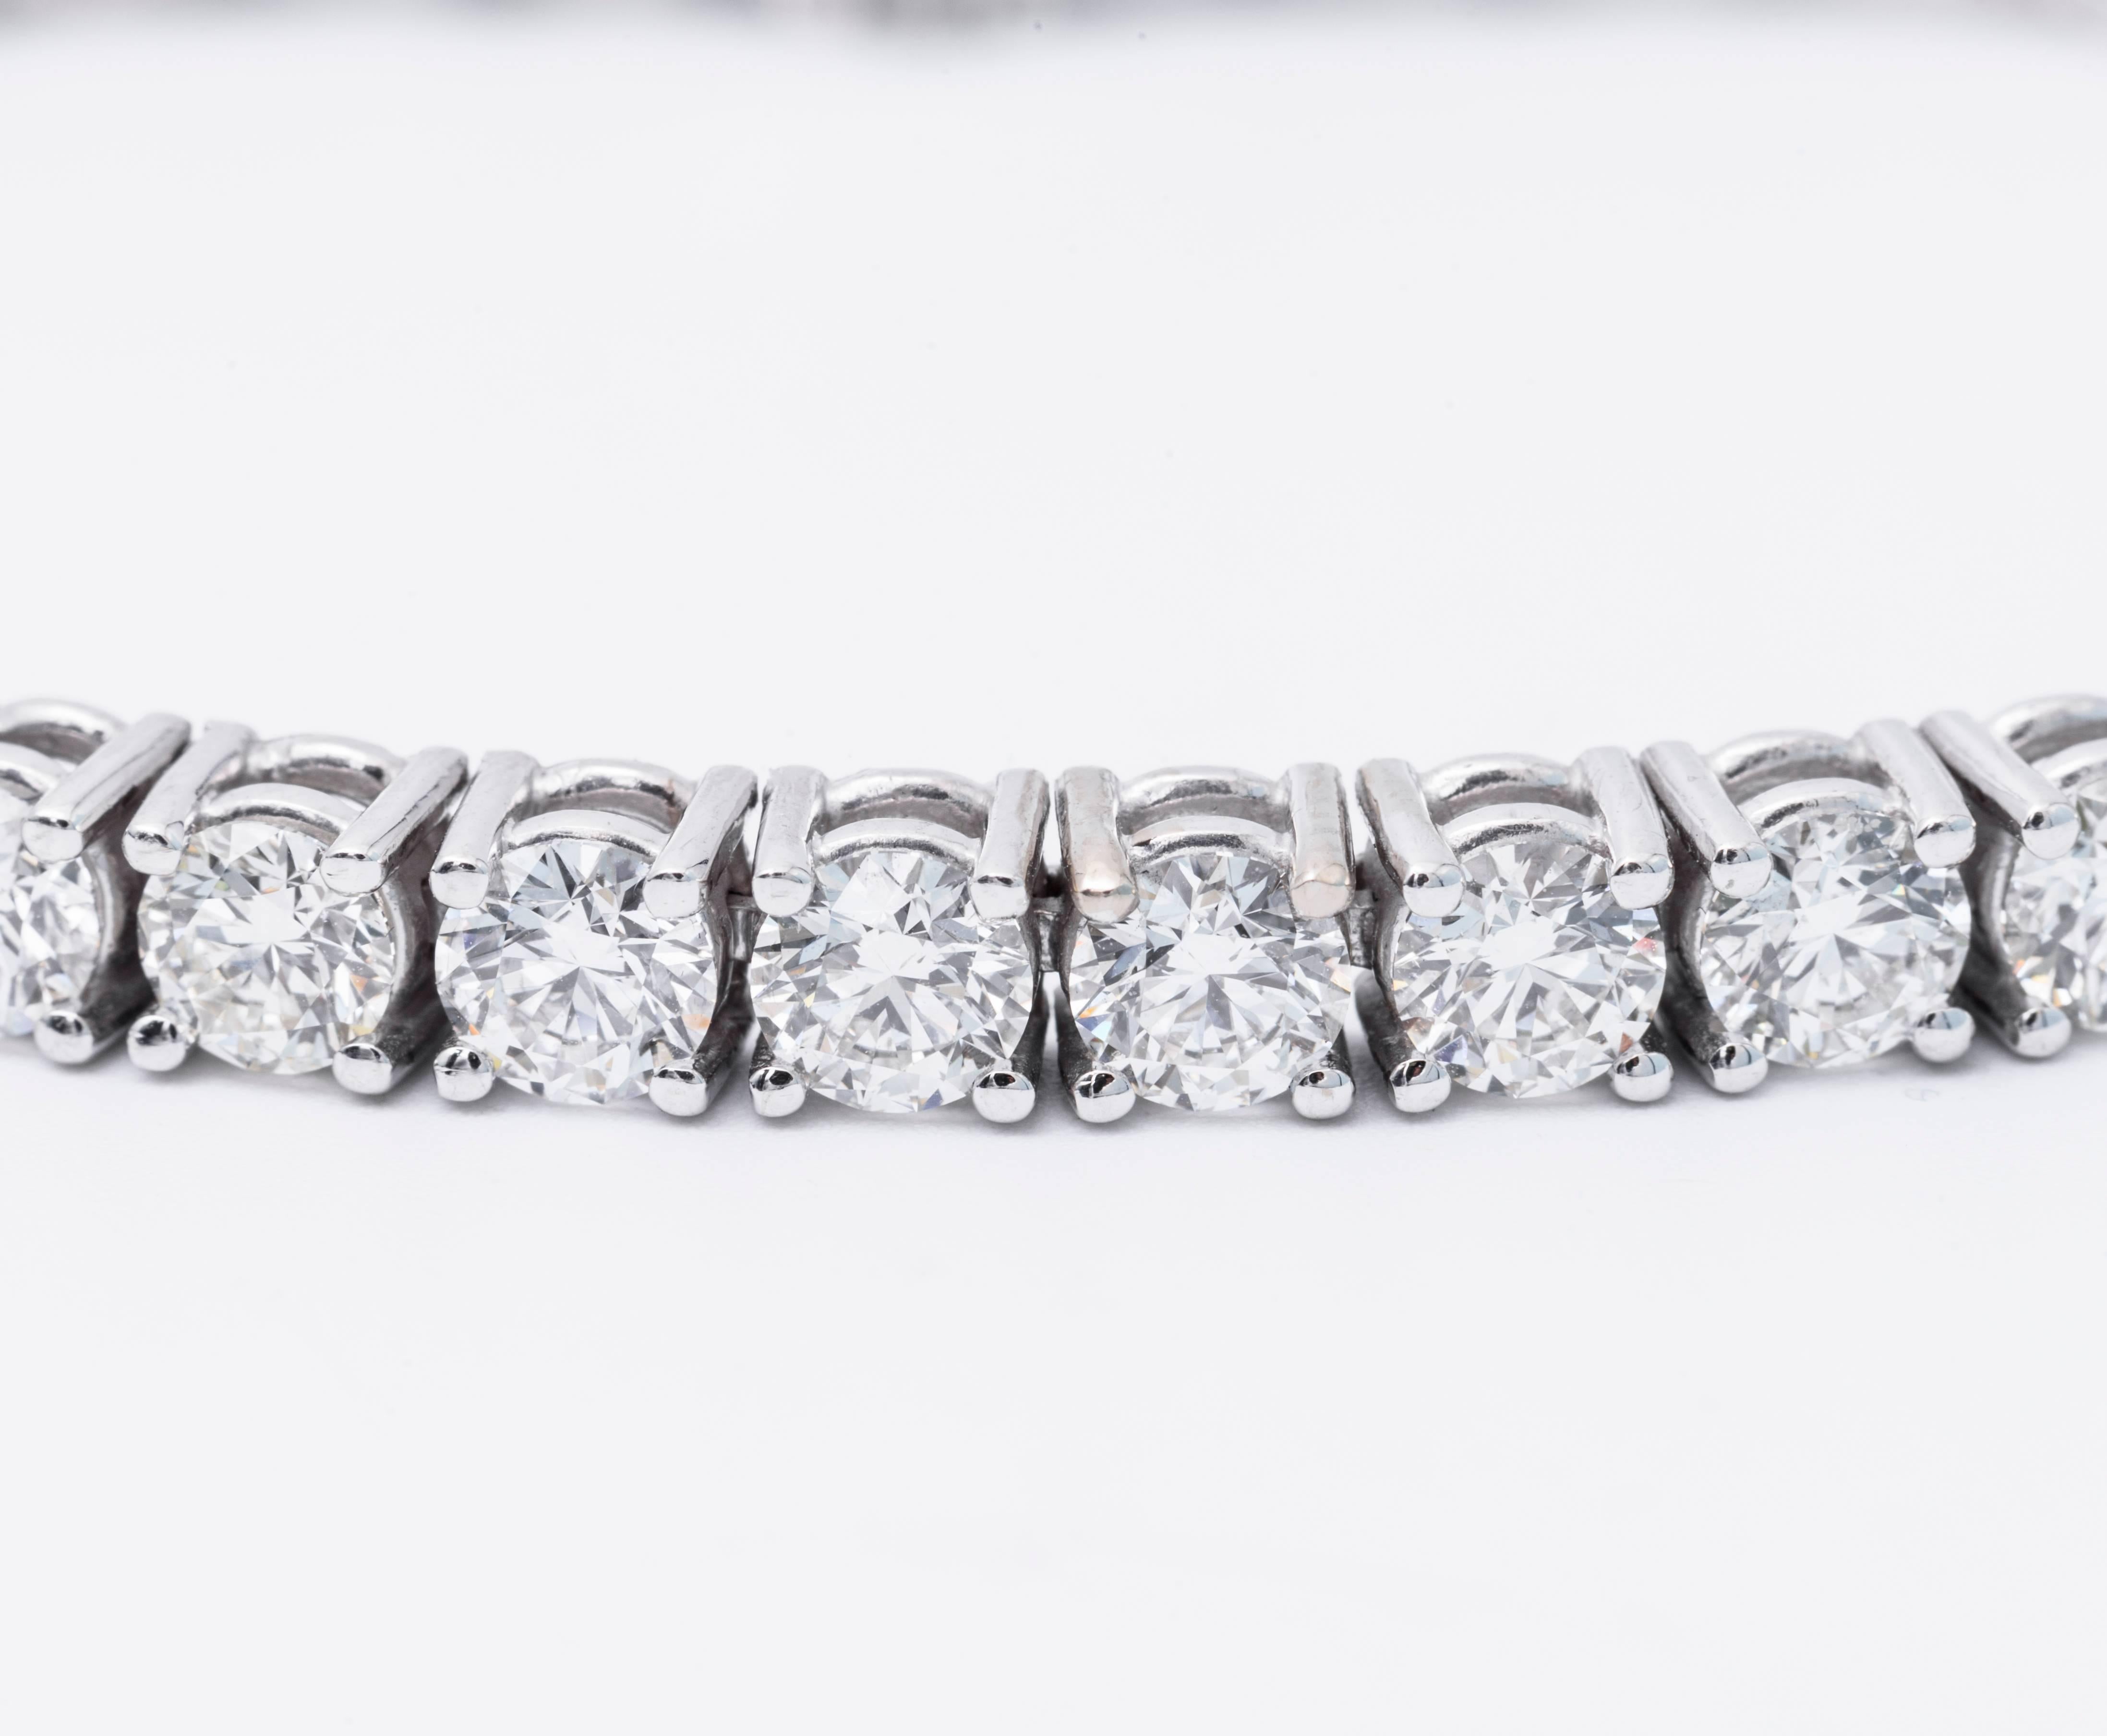 14 Karat White Gold diamond tennis bracelet featuring round brilliants weighing 5 Carats.
Color G-H
Clarity SI

Can be made in 18 Karat White Gold or Yellow Gold
DM for pricing.

In stock 1-22 Carat Tennis bracelets.
